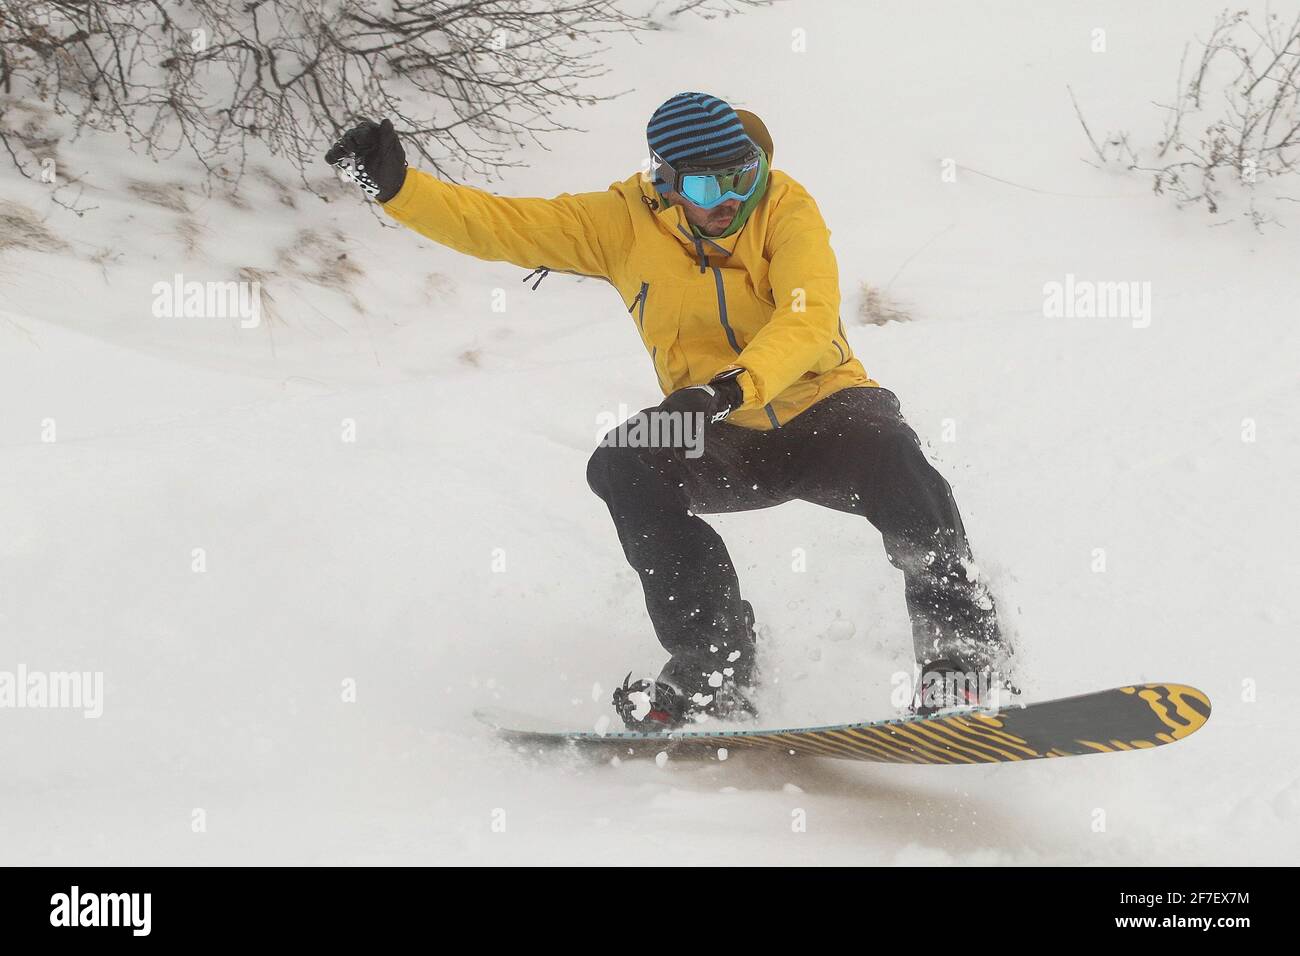 A snowboarder in snow going downhill amd jumping. Boarder with yellow  clothing with black trousers and orange board riding and jumping over snow  on a Stock Photo - Alamy